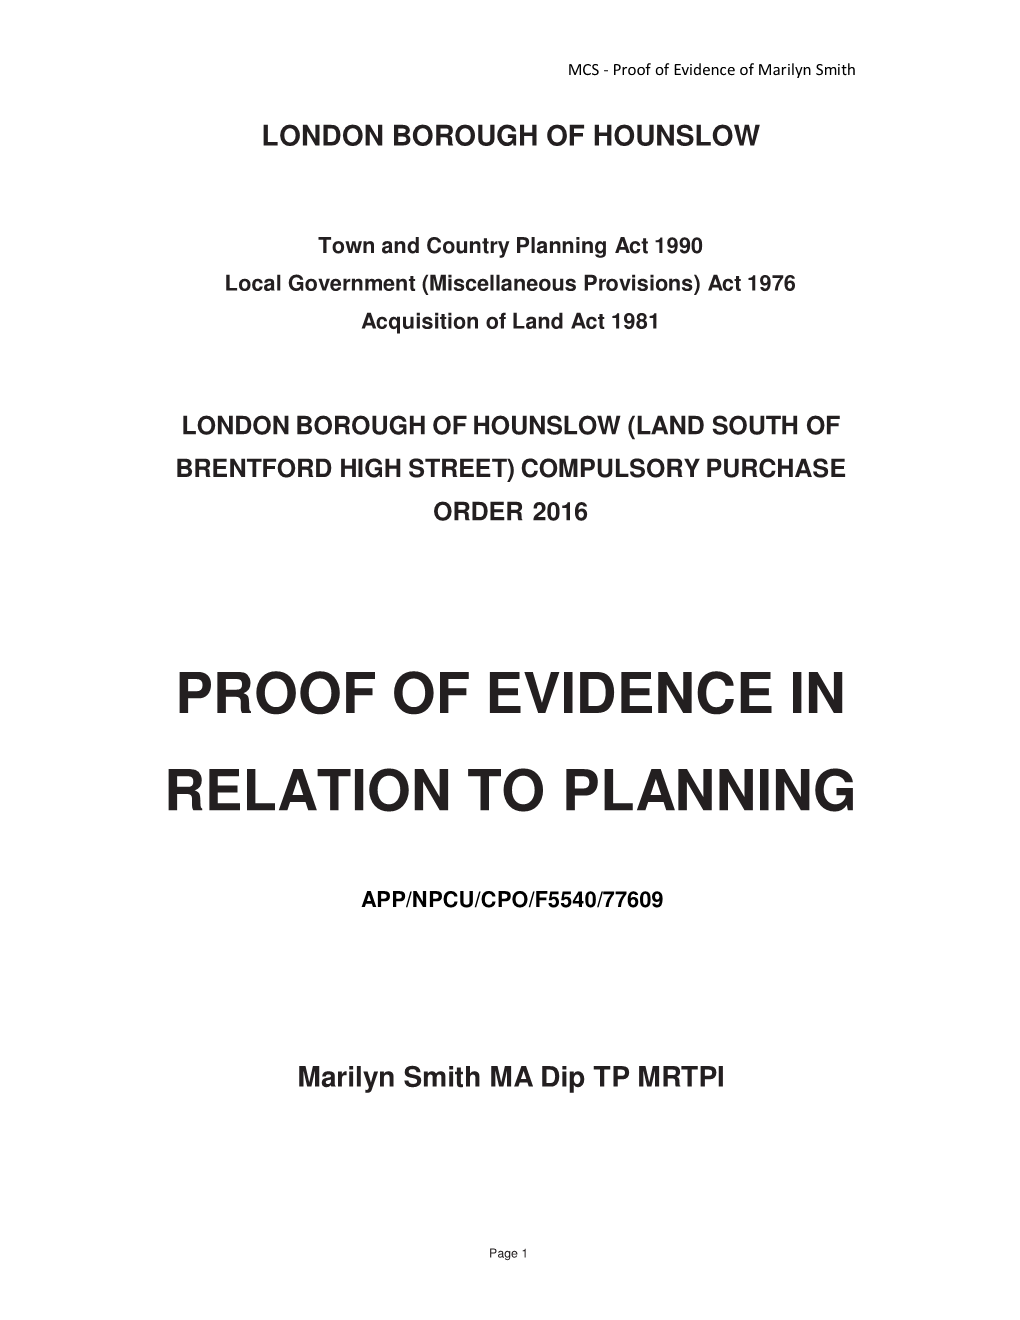 Proof of Evidence in Relation to Planning